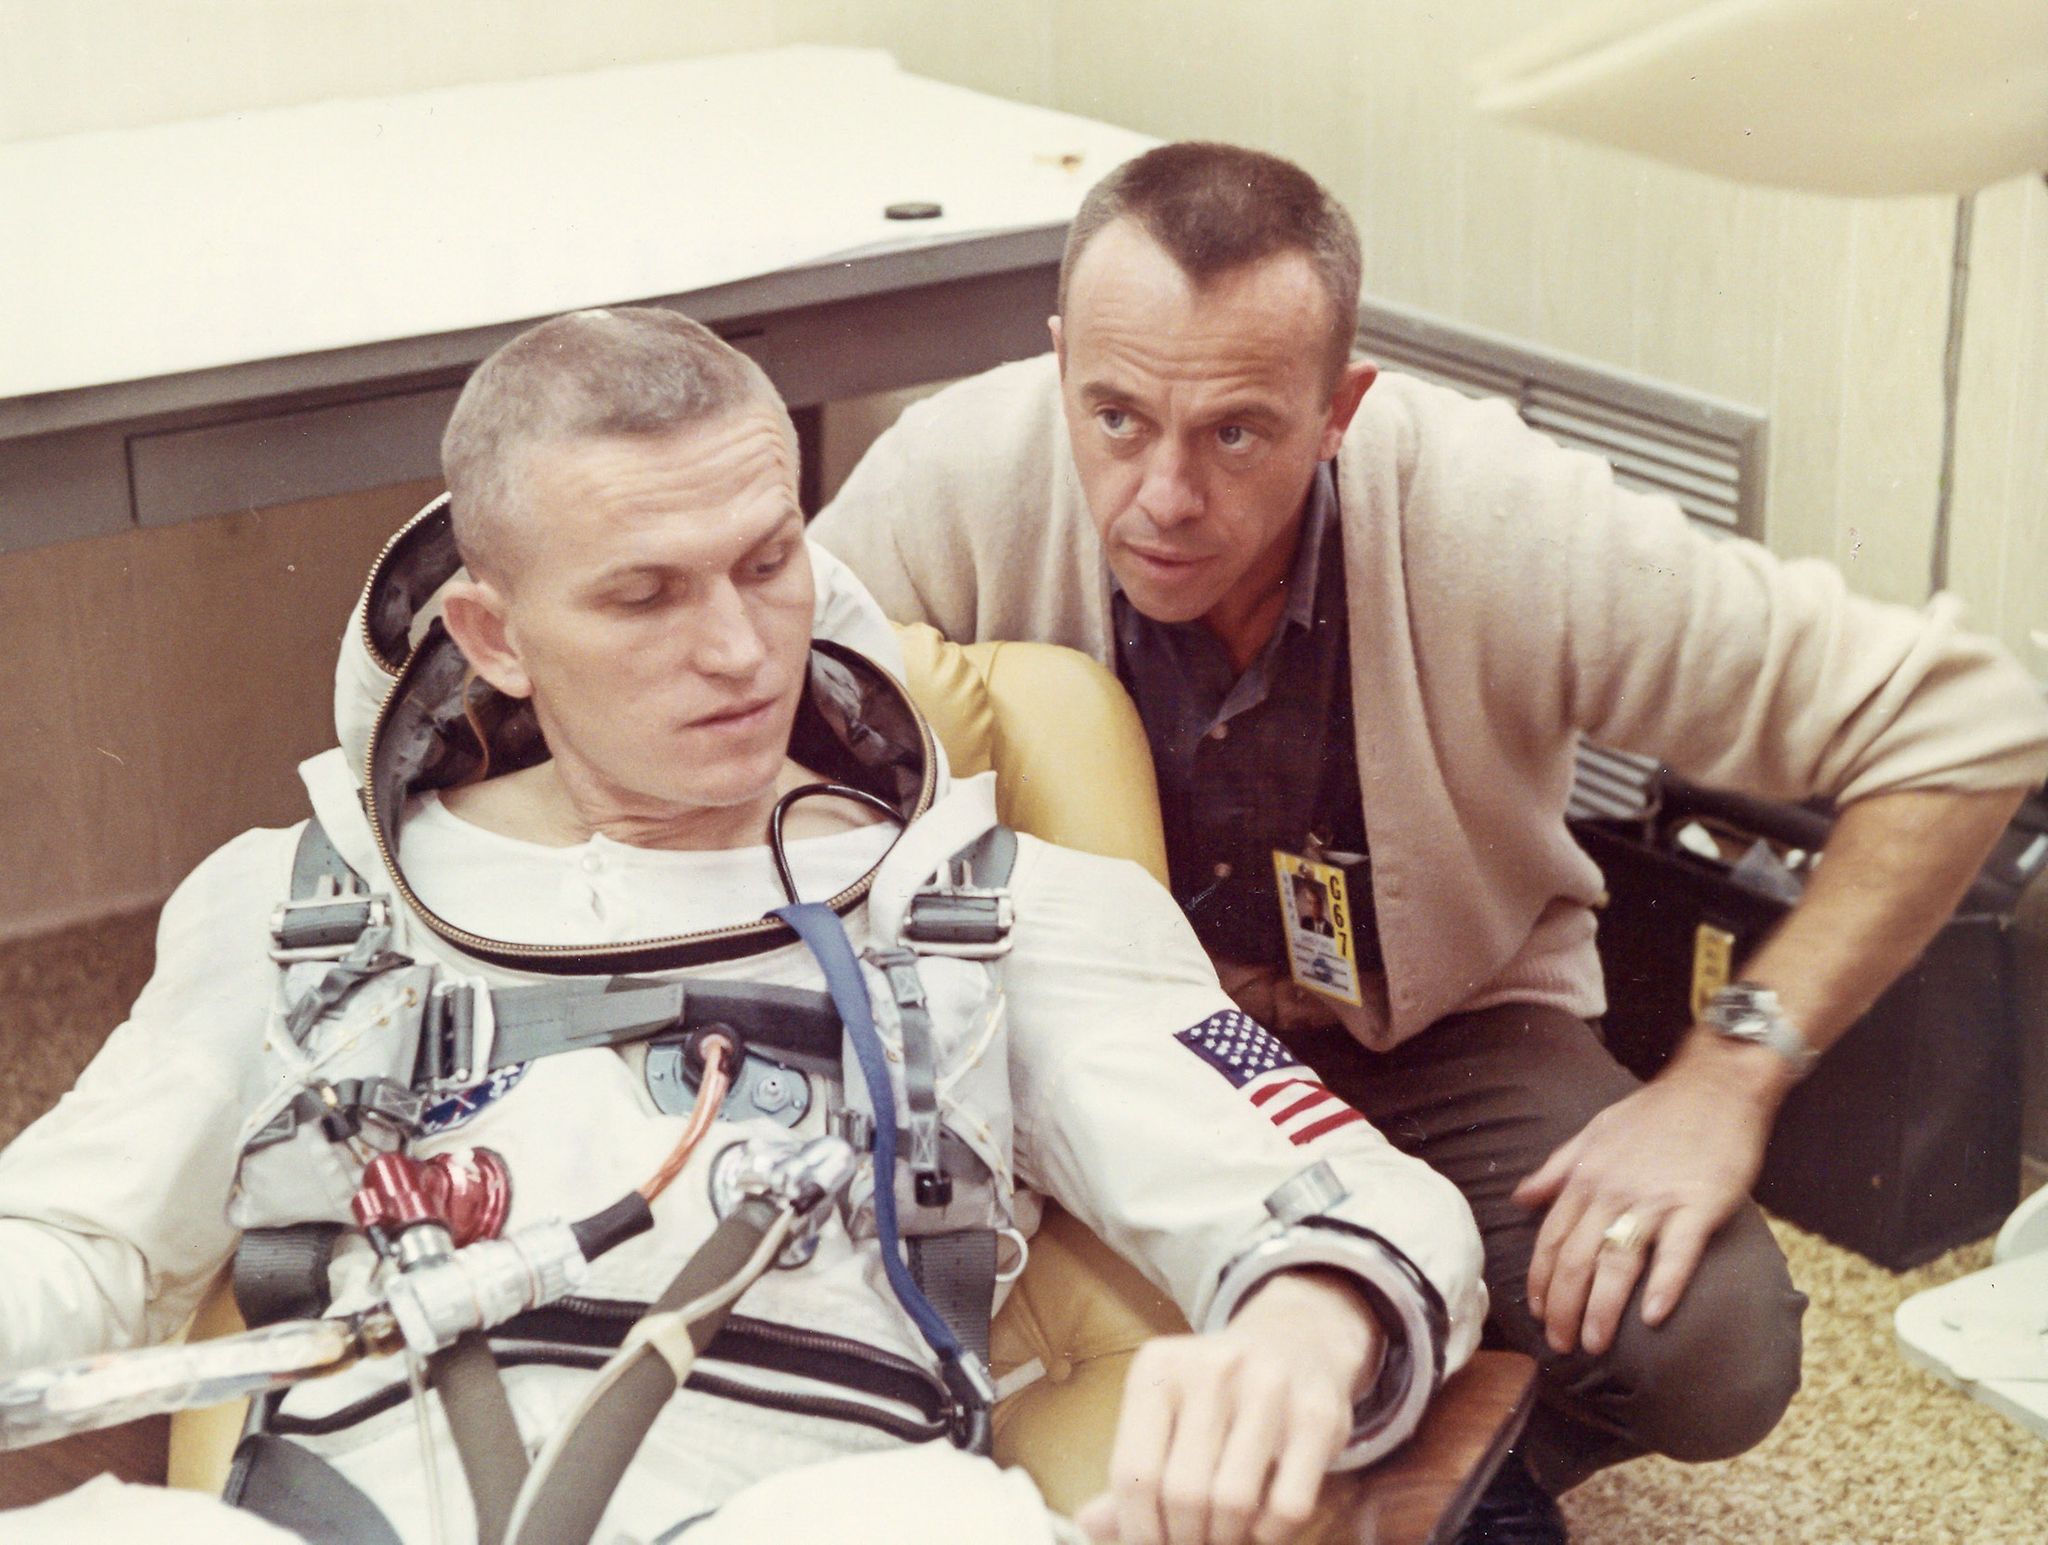 Astronauts Frank Borman and James Lovell during countdown, Gemini 7, December 1965 Two vintage